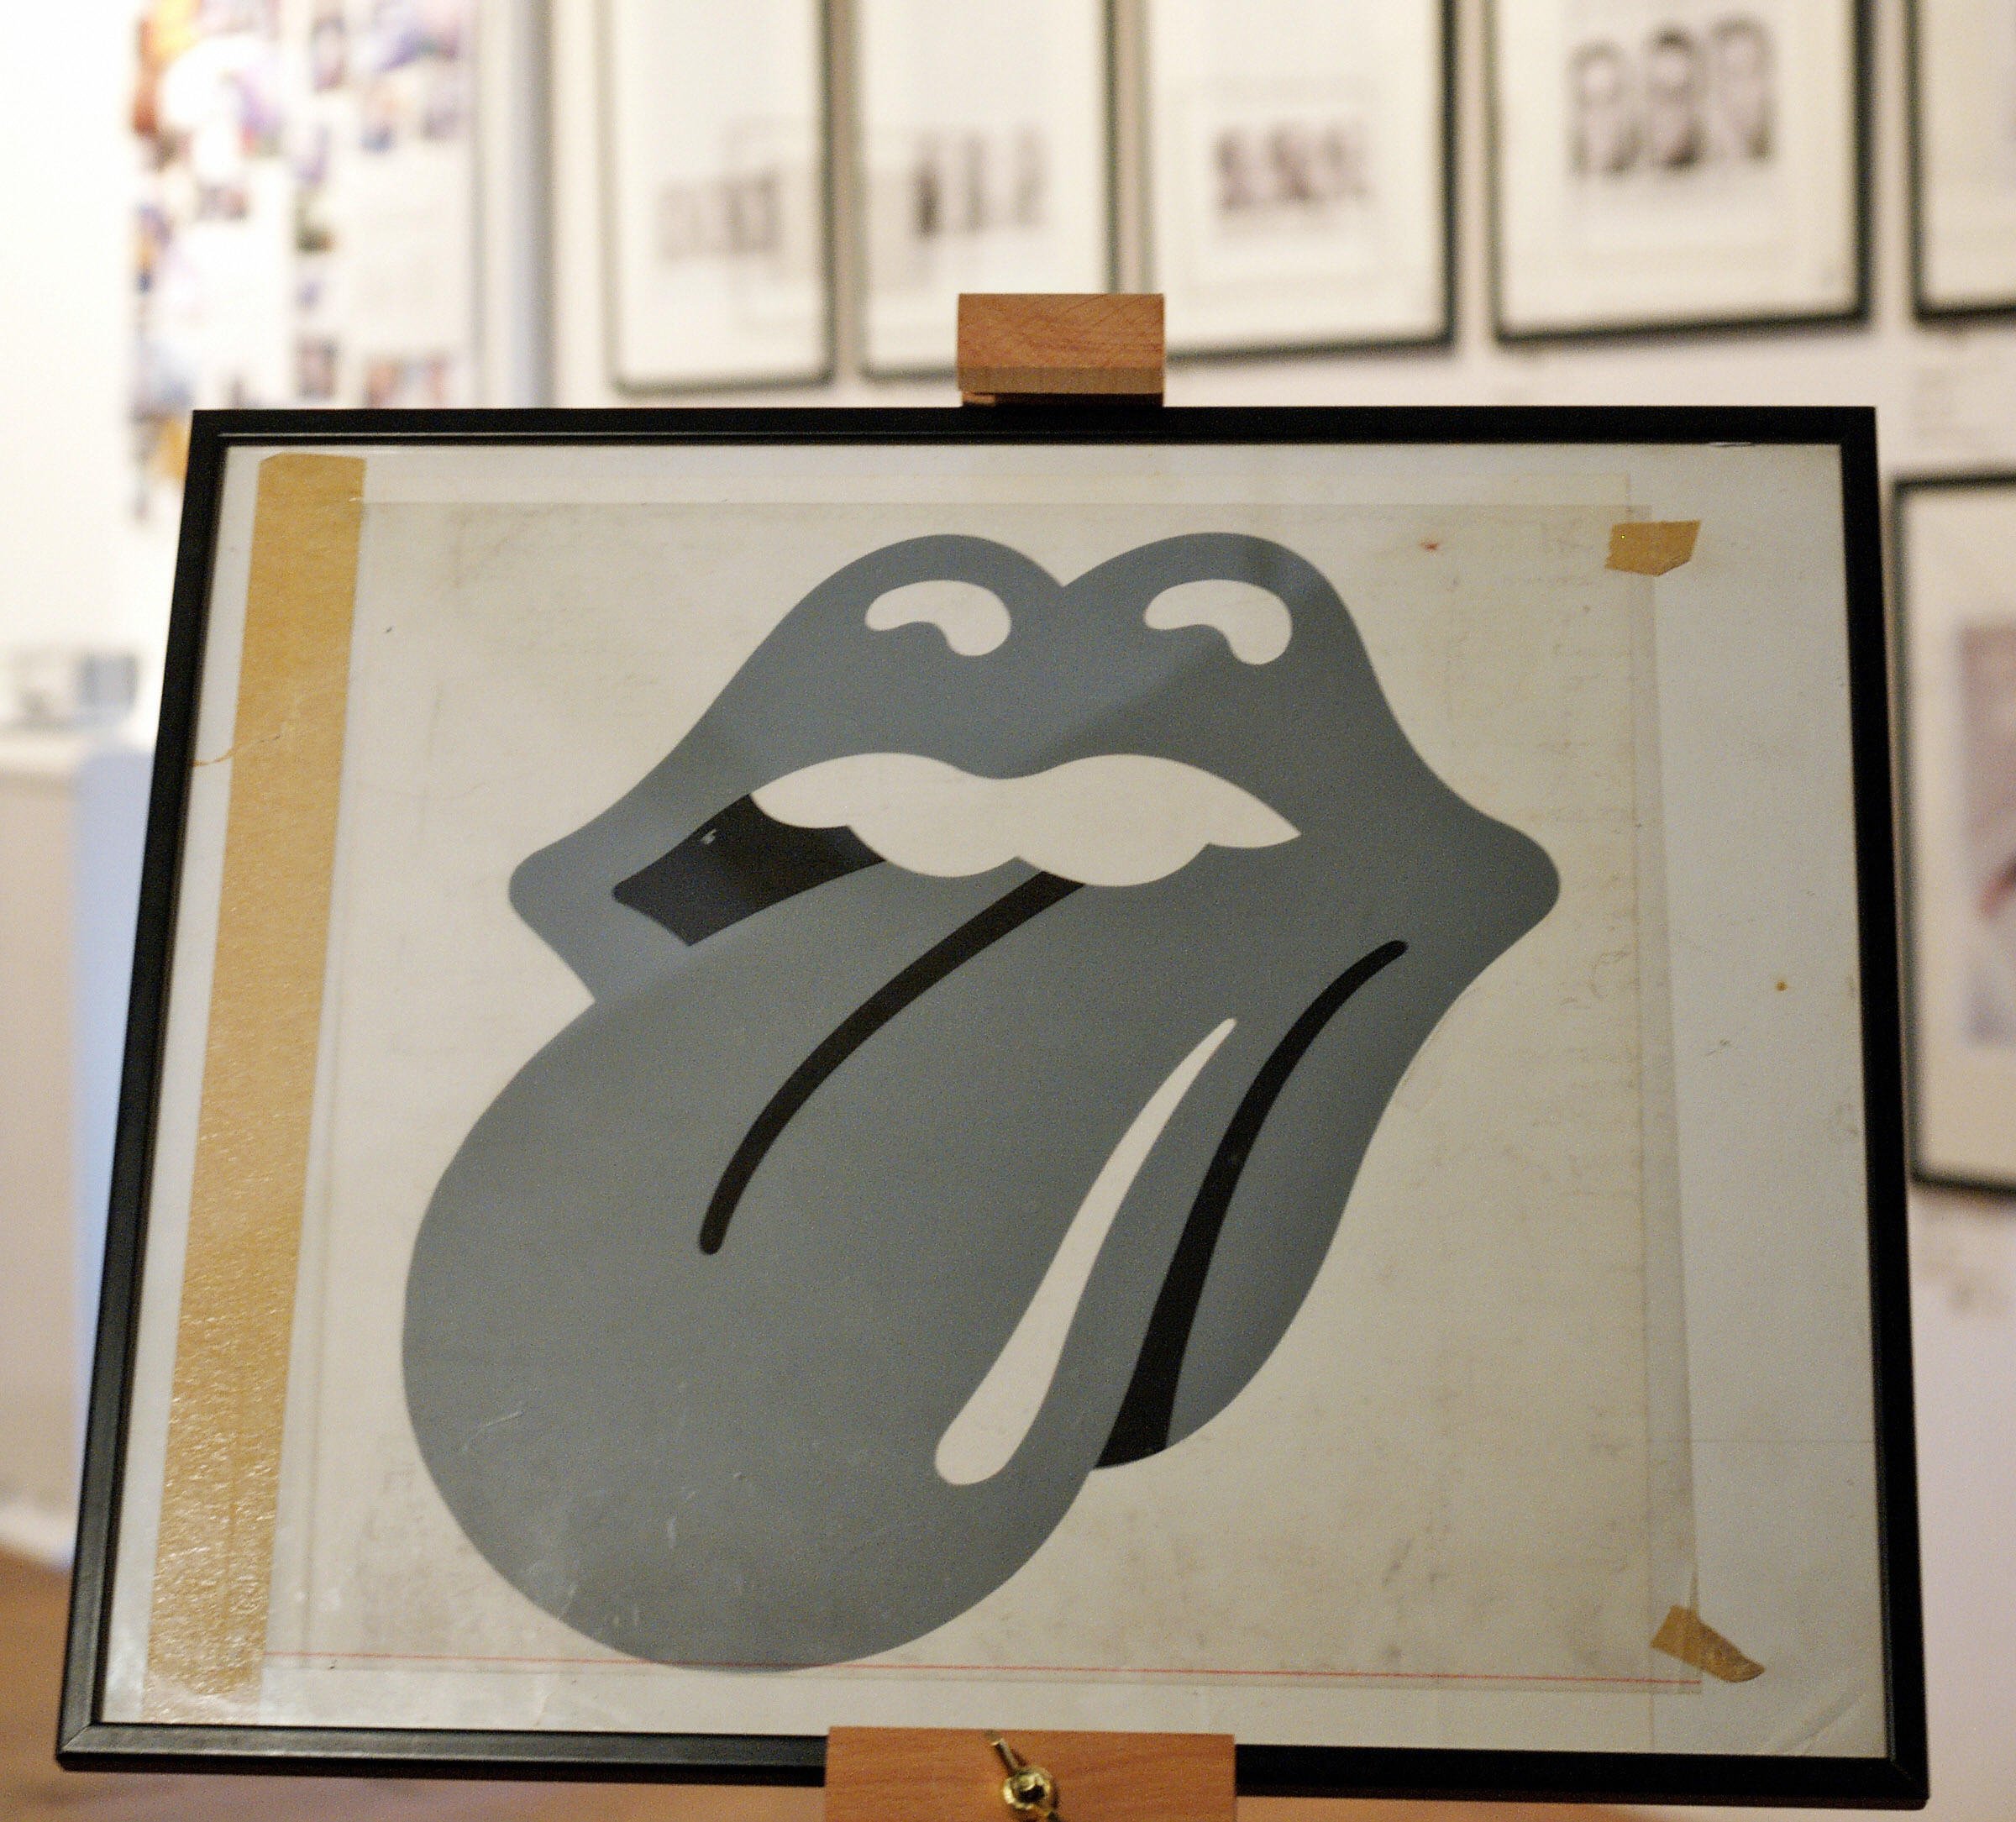 A framed image of The Rolling Stones' logo